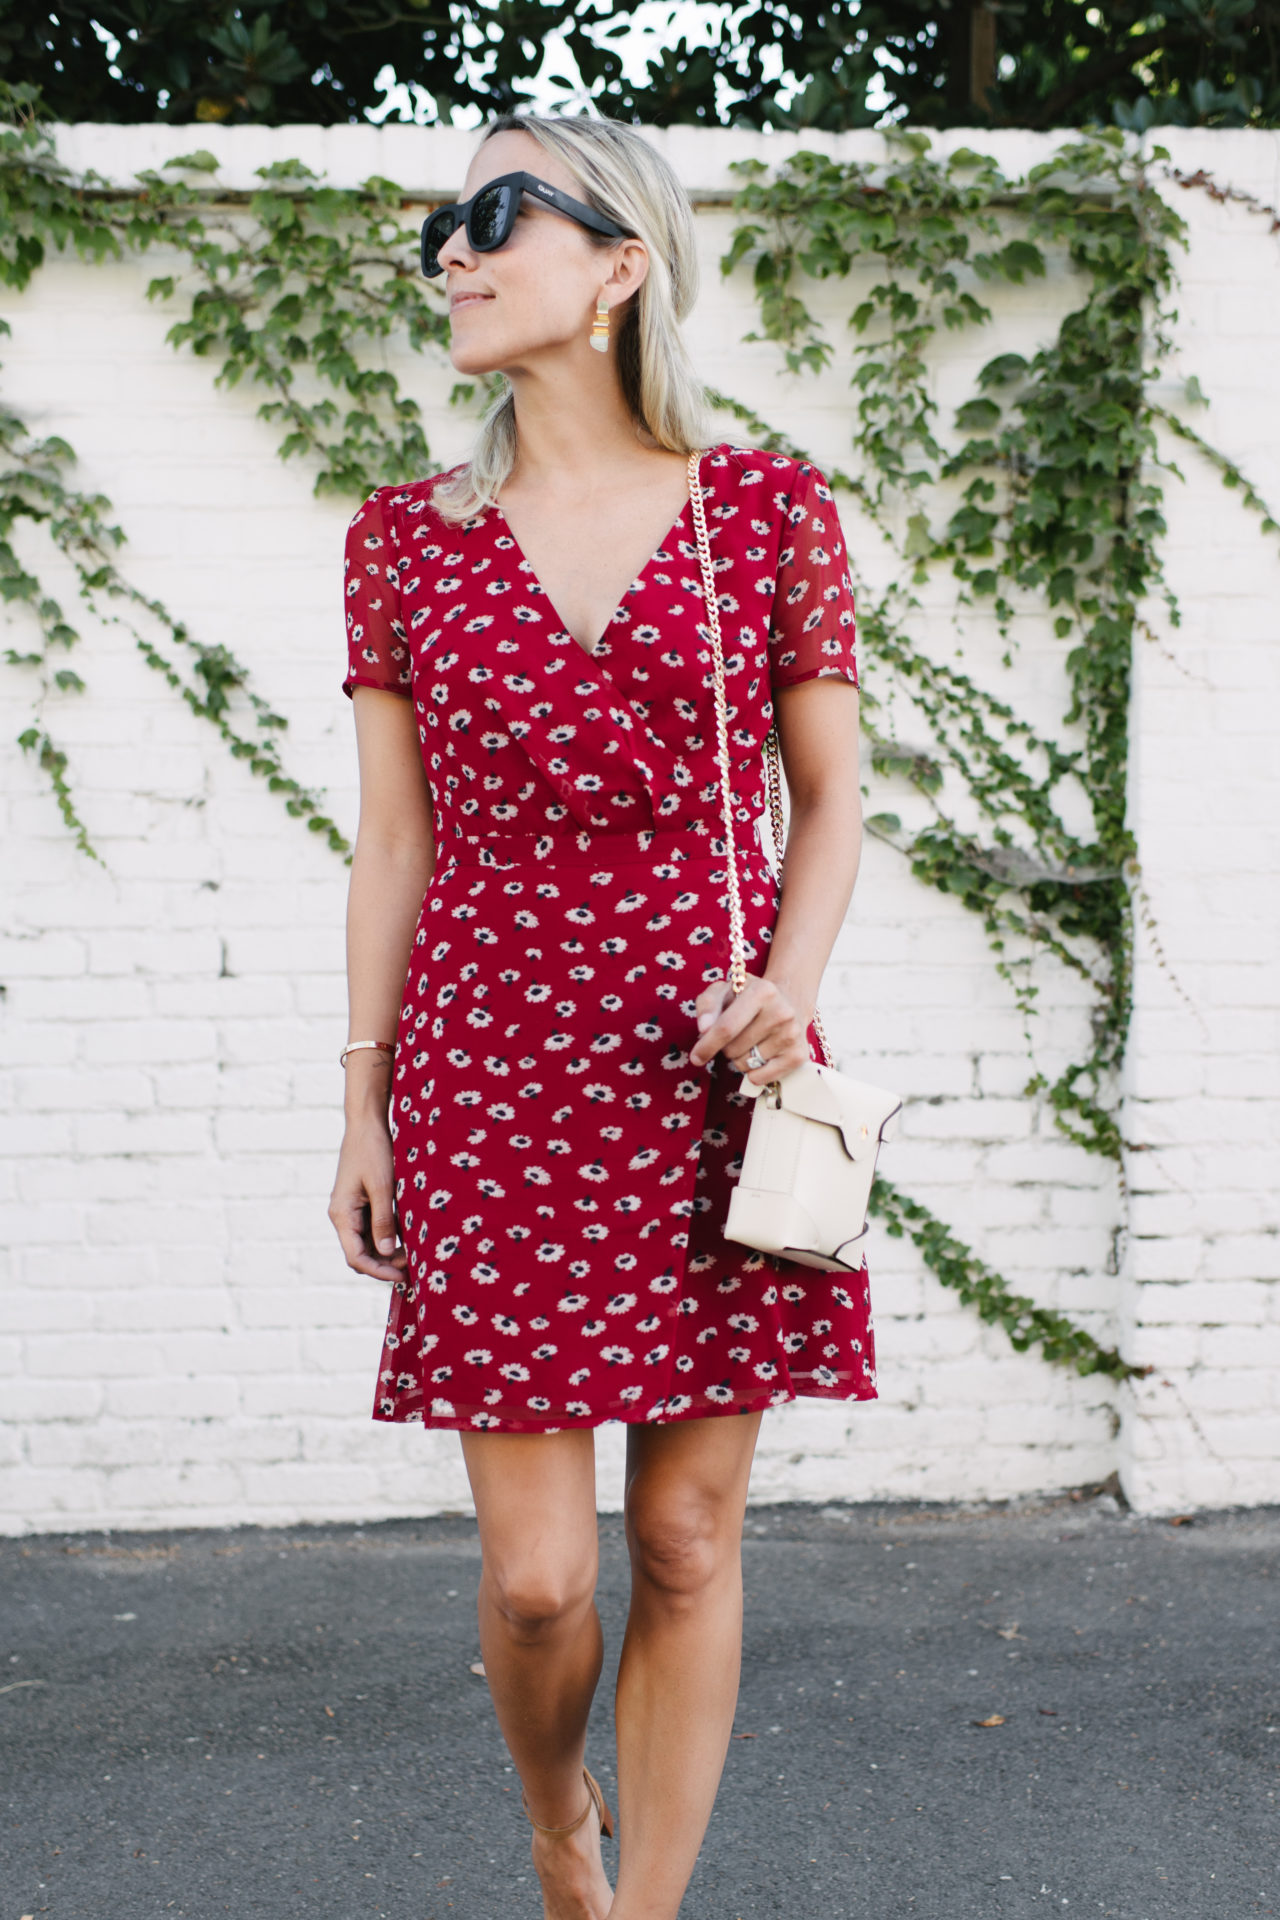 Red Floral Dress in August | Damsel In Dior